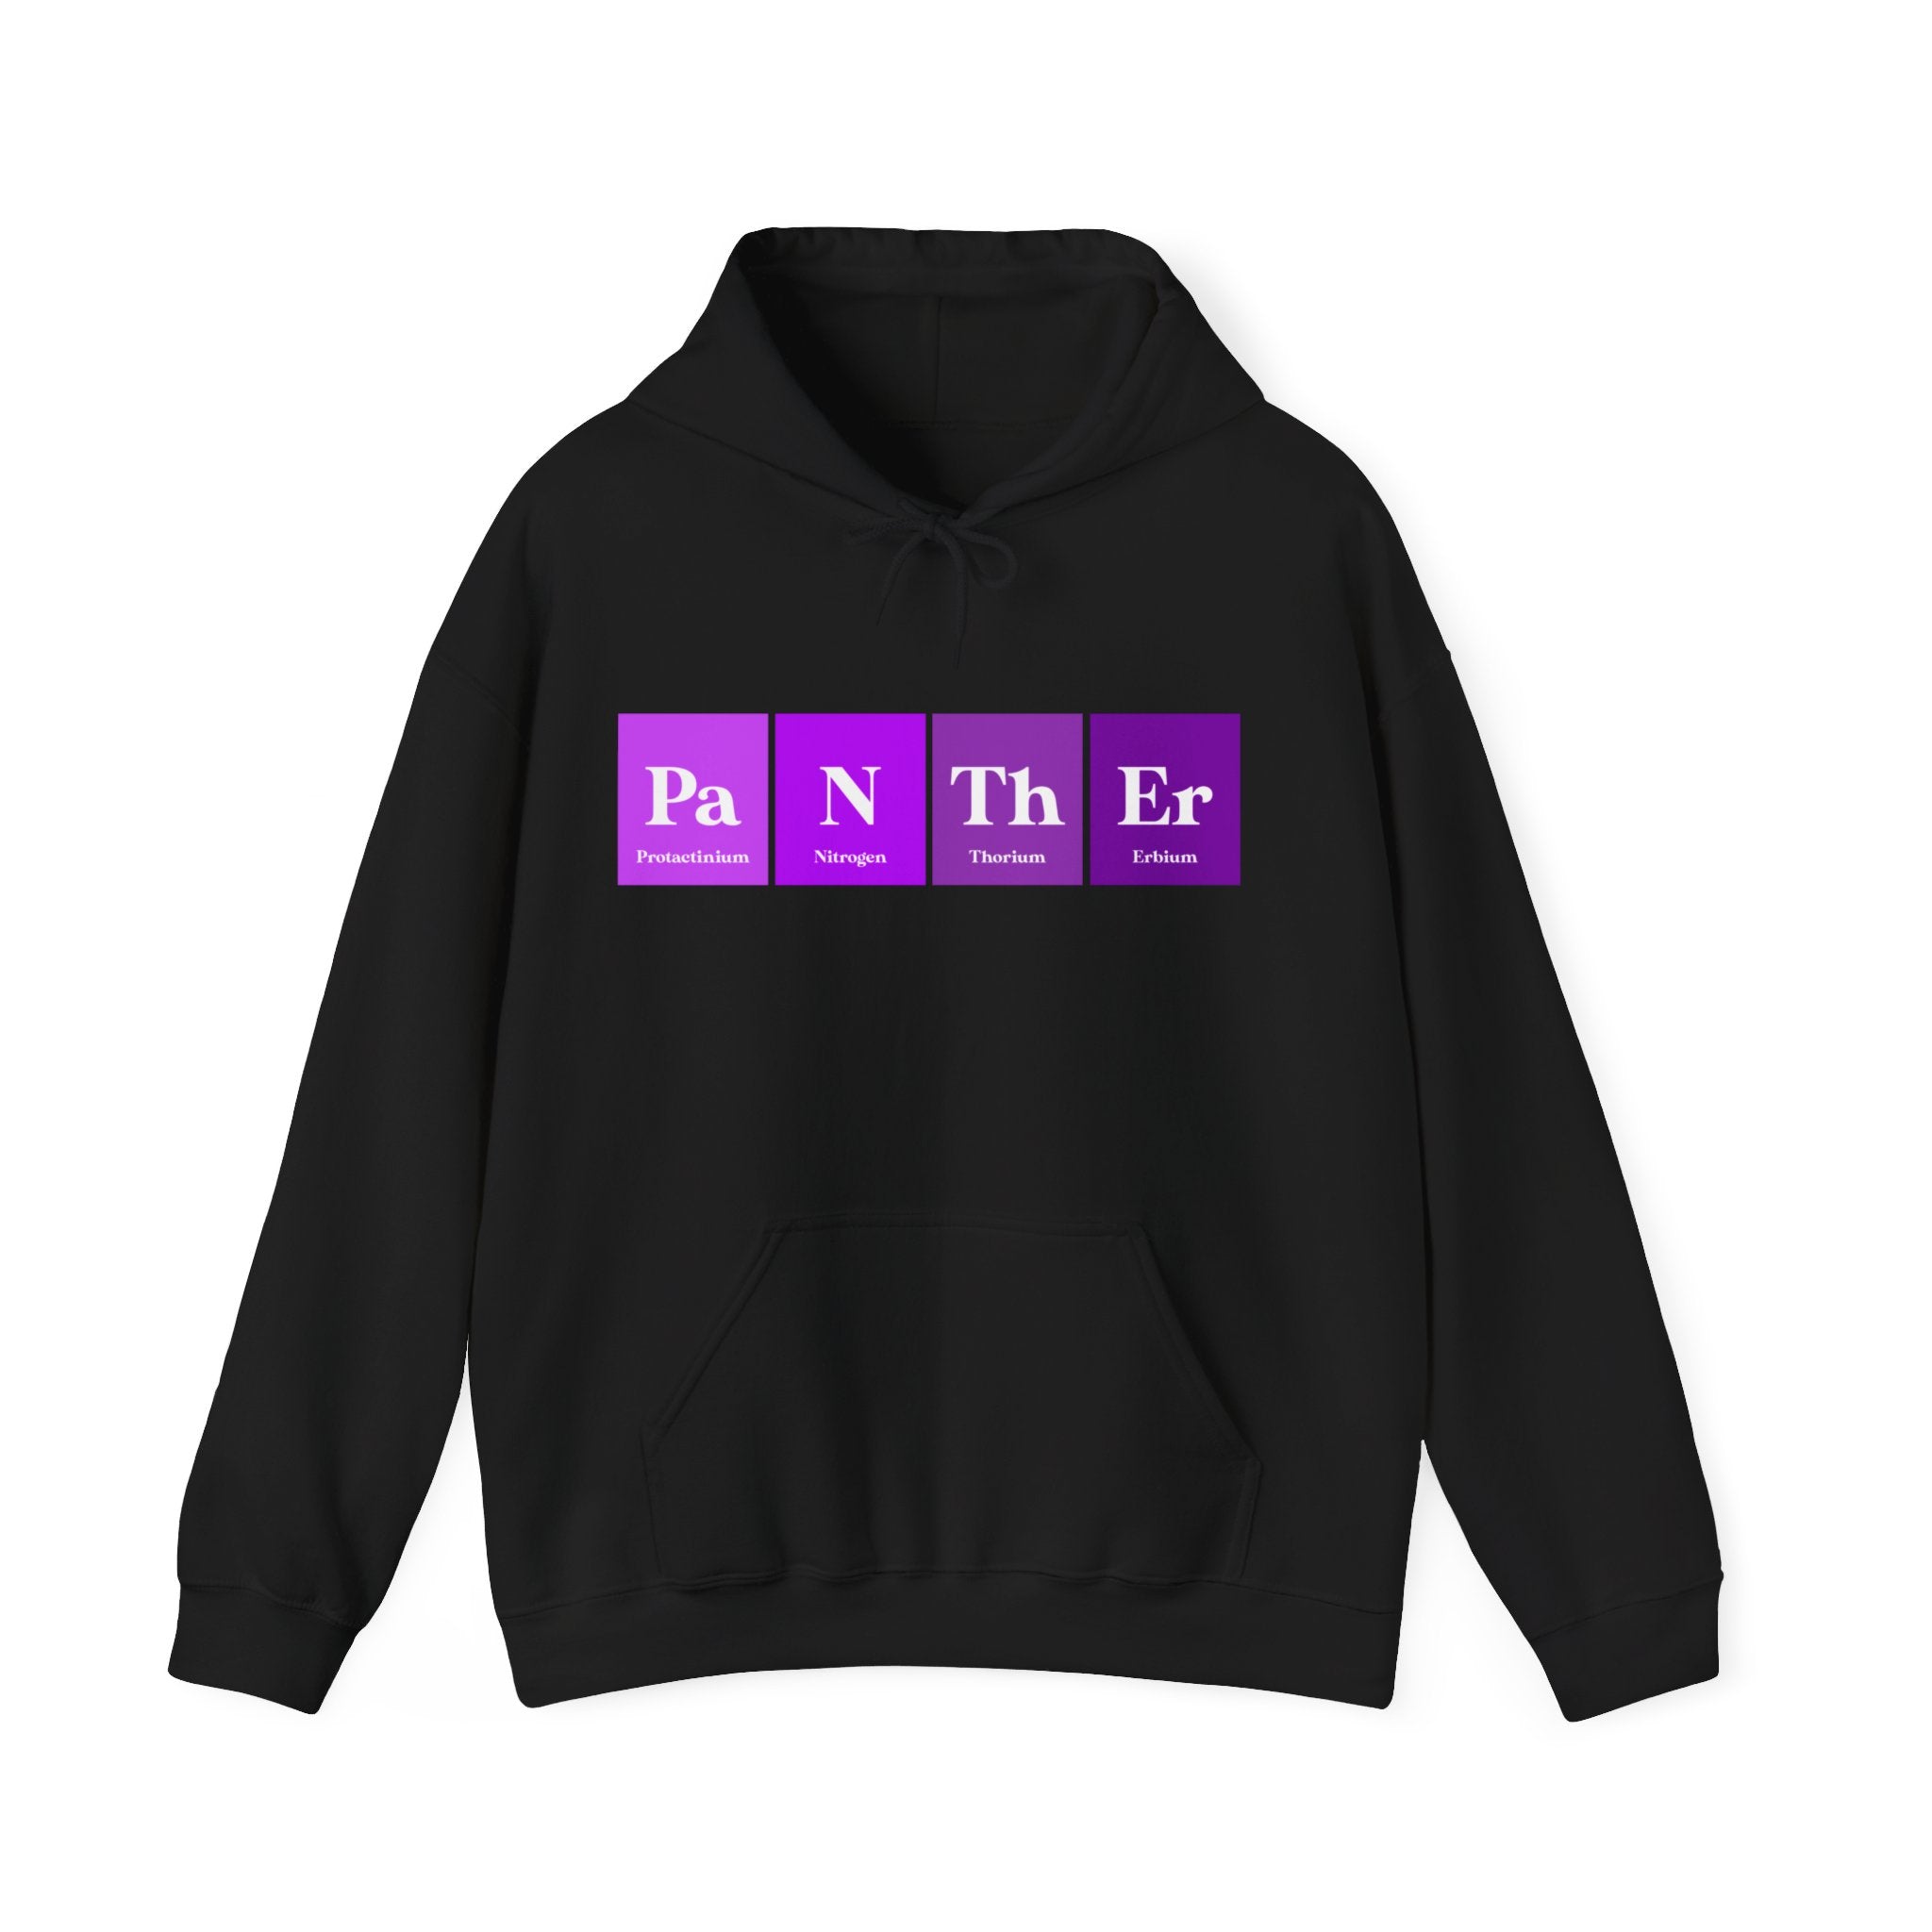 A 100% cotton black Pa-N-Th-Er - Hooded Sweatshirt featuring a unique "Pa-N-Th-Er" design using elements from the periodic table.